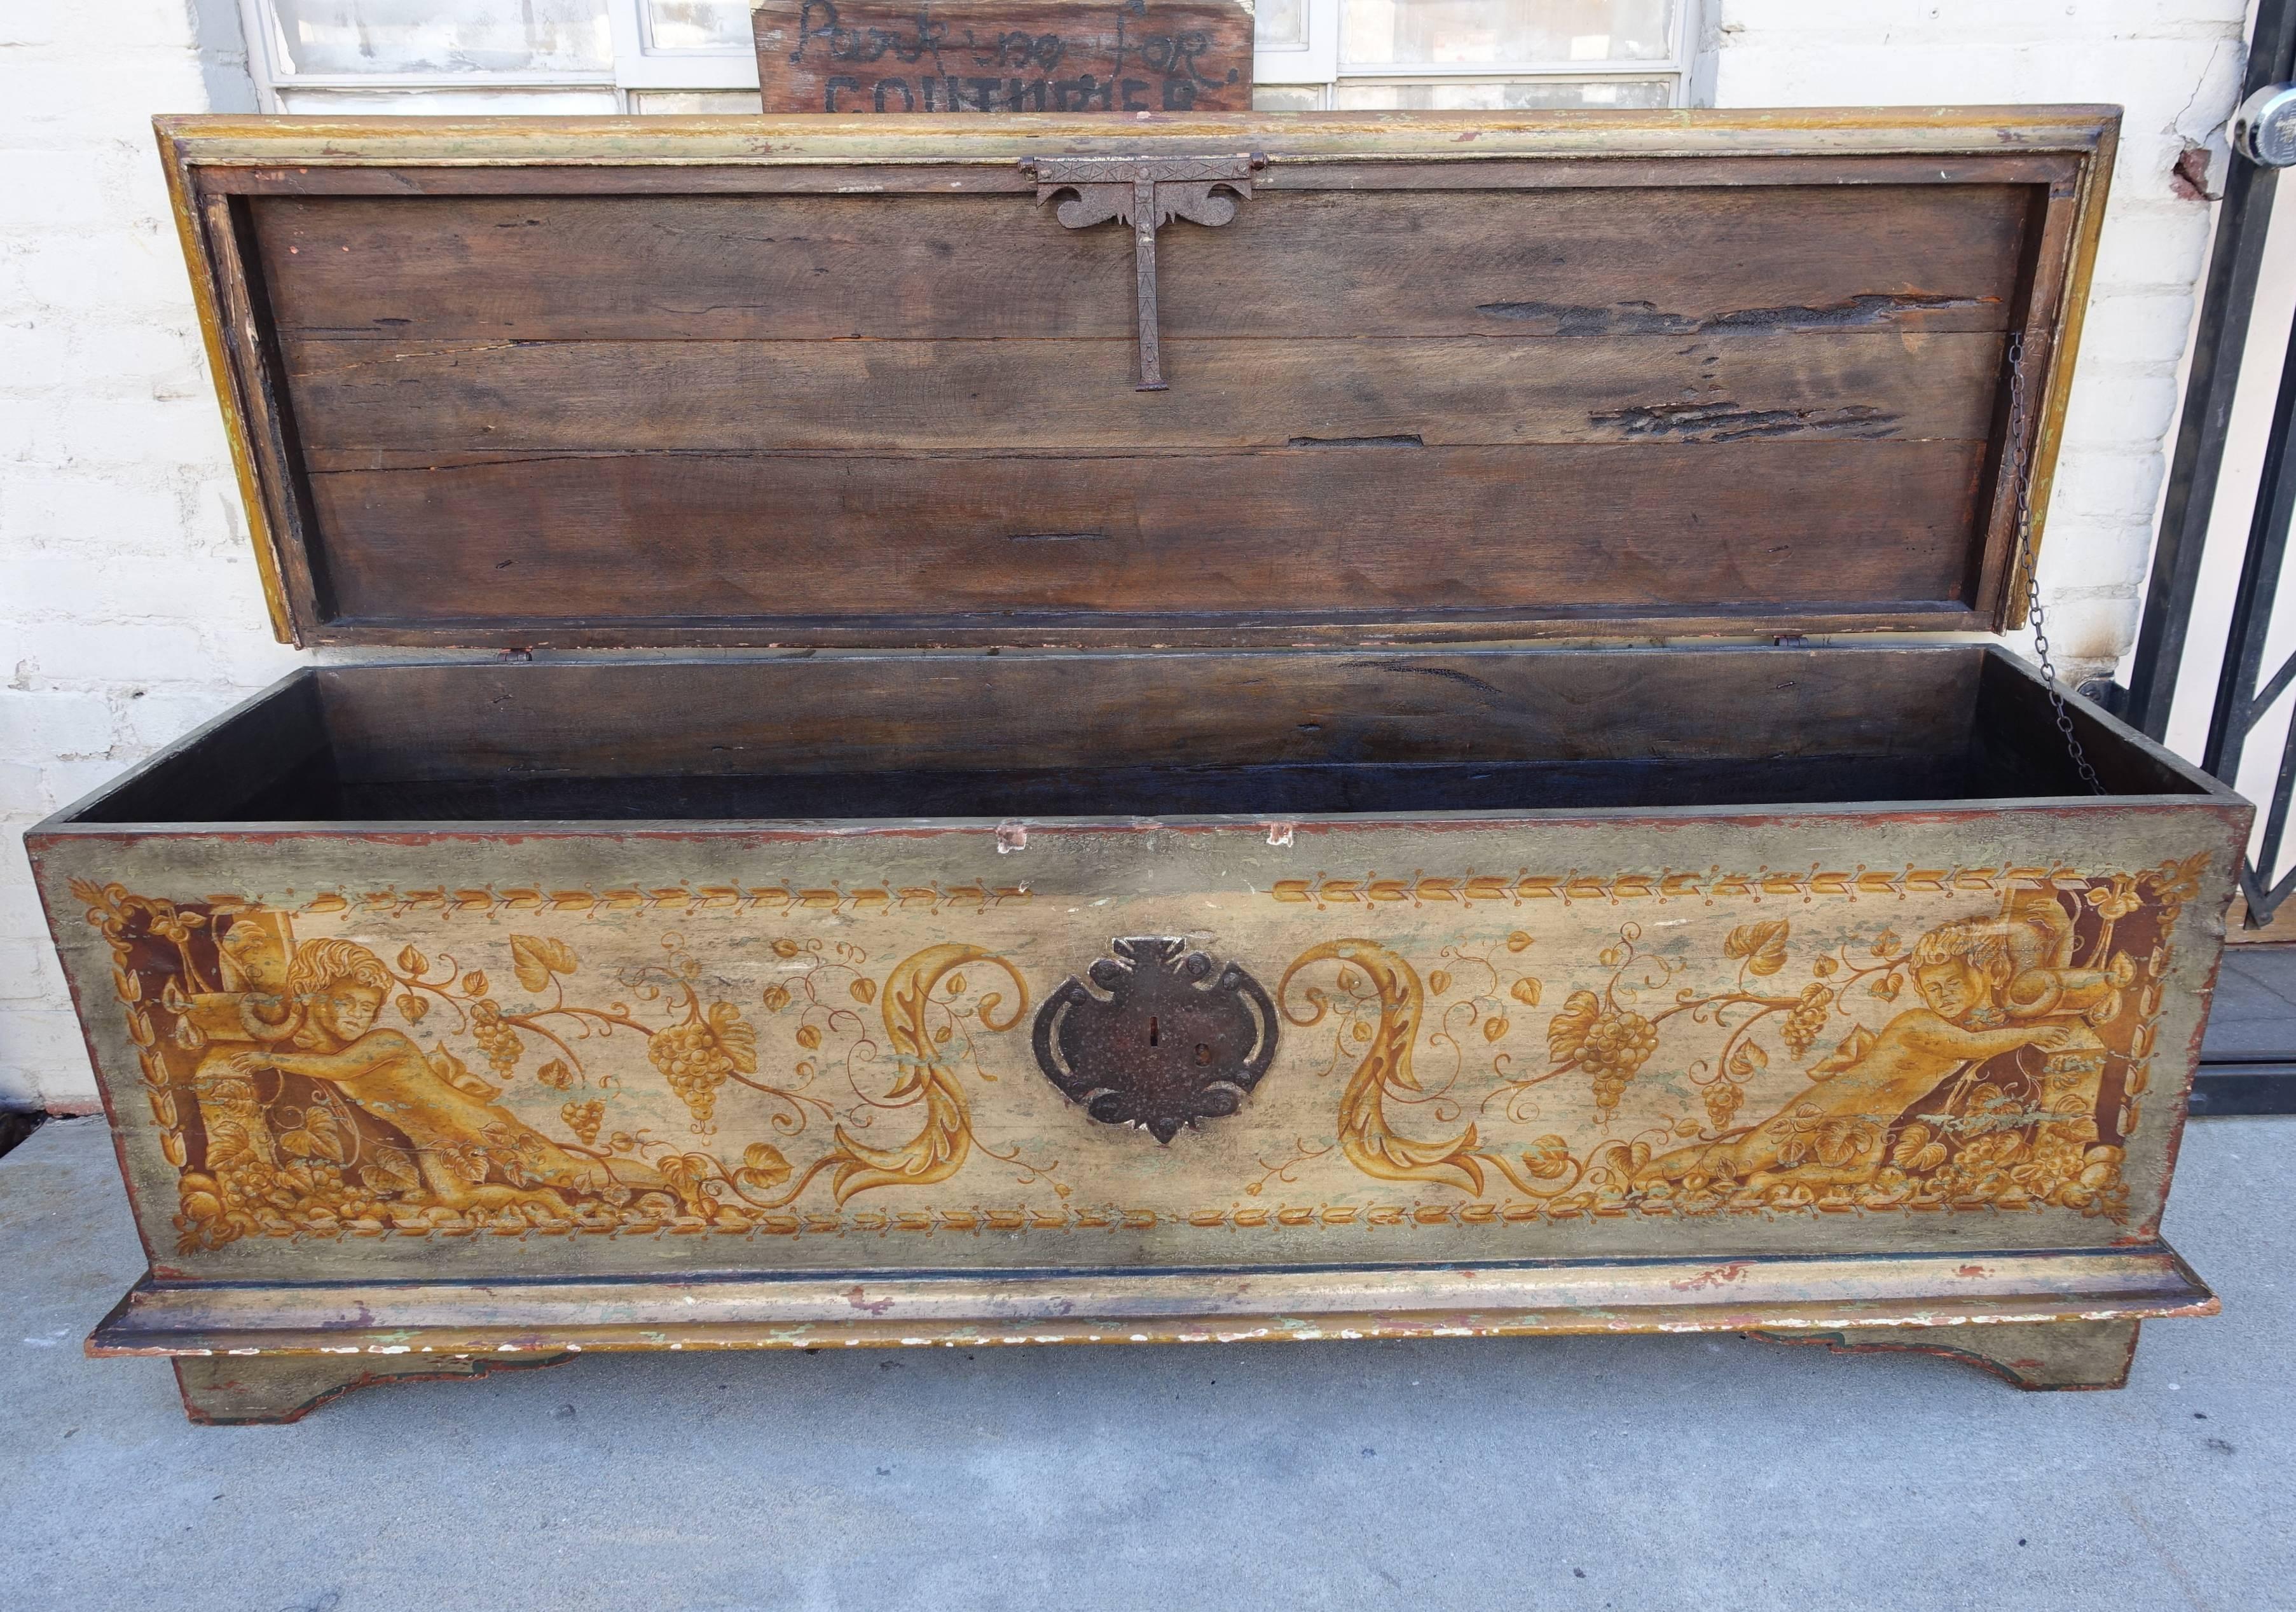 Early 20th Century Italian Hand-Painted Wood and Iron Trunk, circa 1900